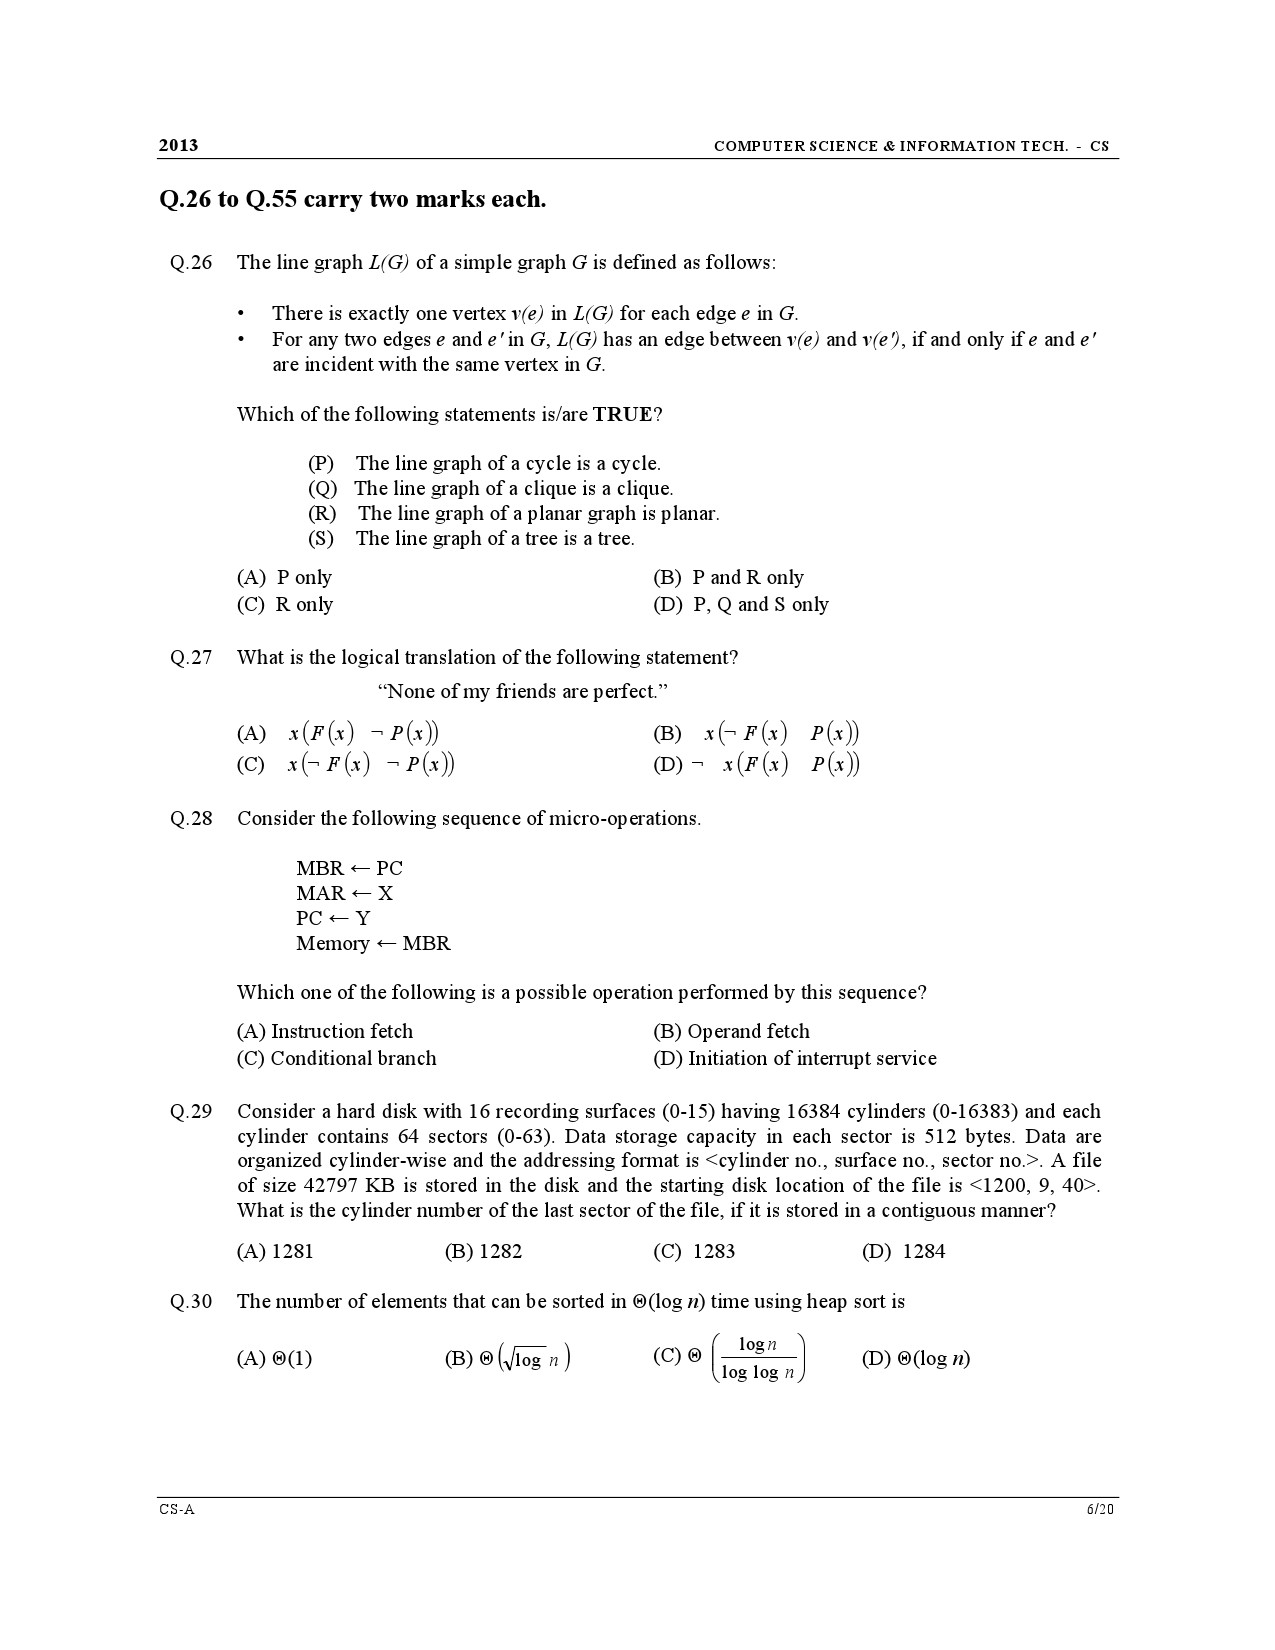 GATE Exam Question Paper 2013 Computer Science and Information Technology 6